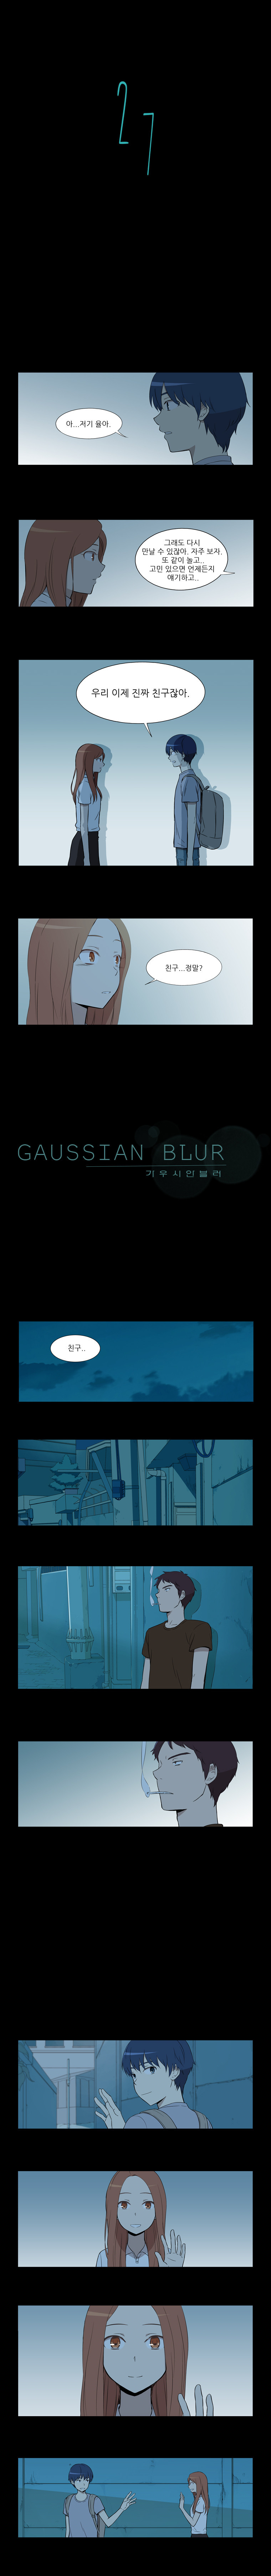 Gaussian Blur - Chapter 27 - Page 1